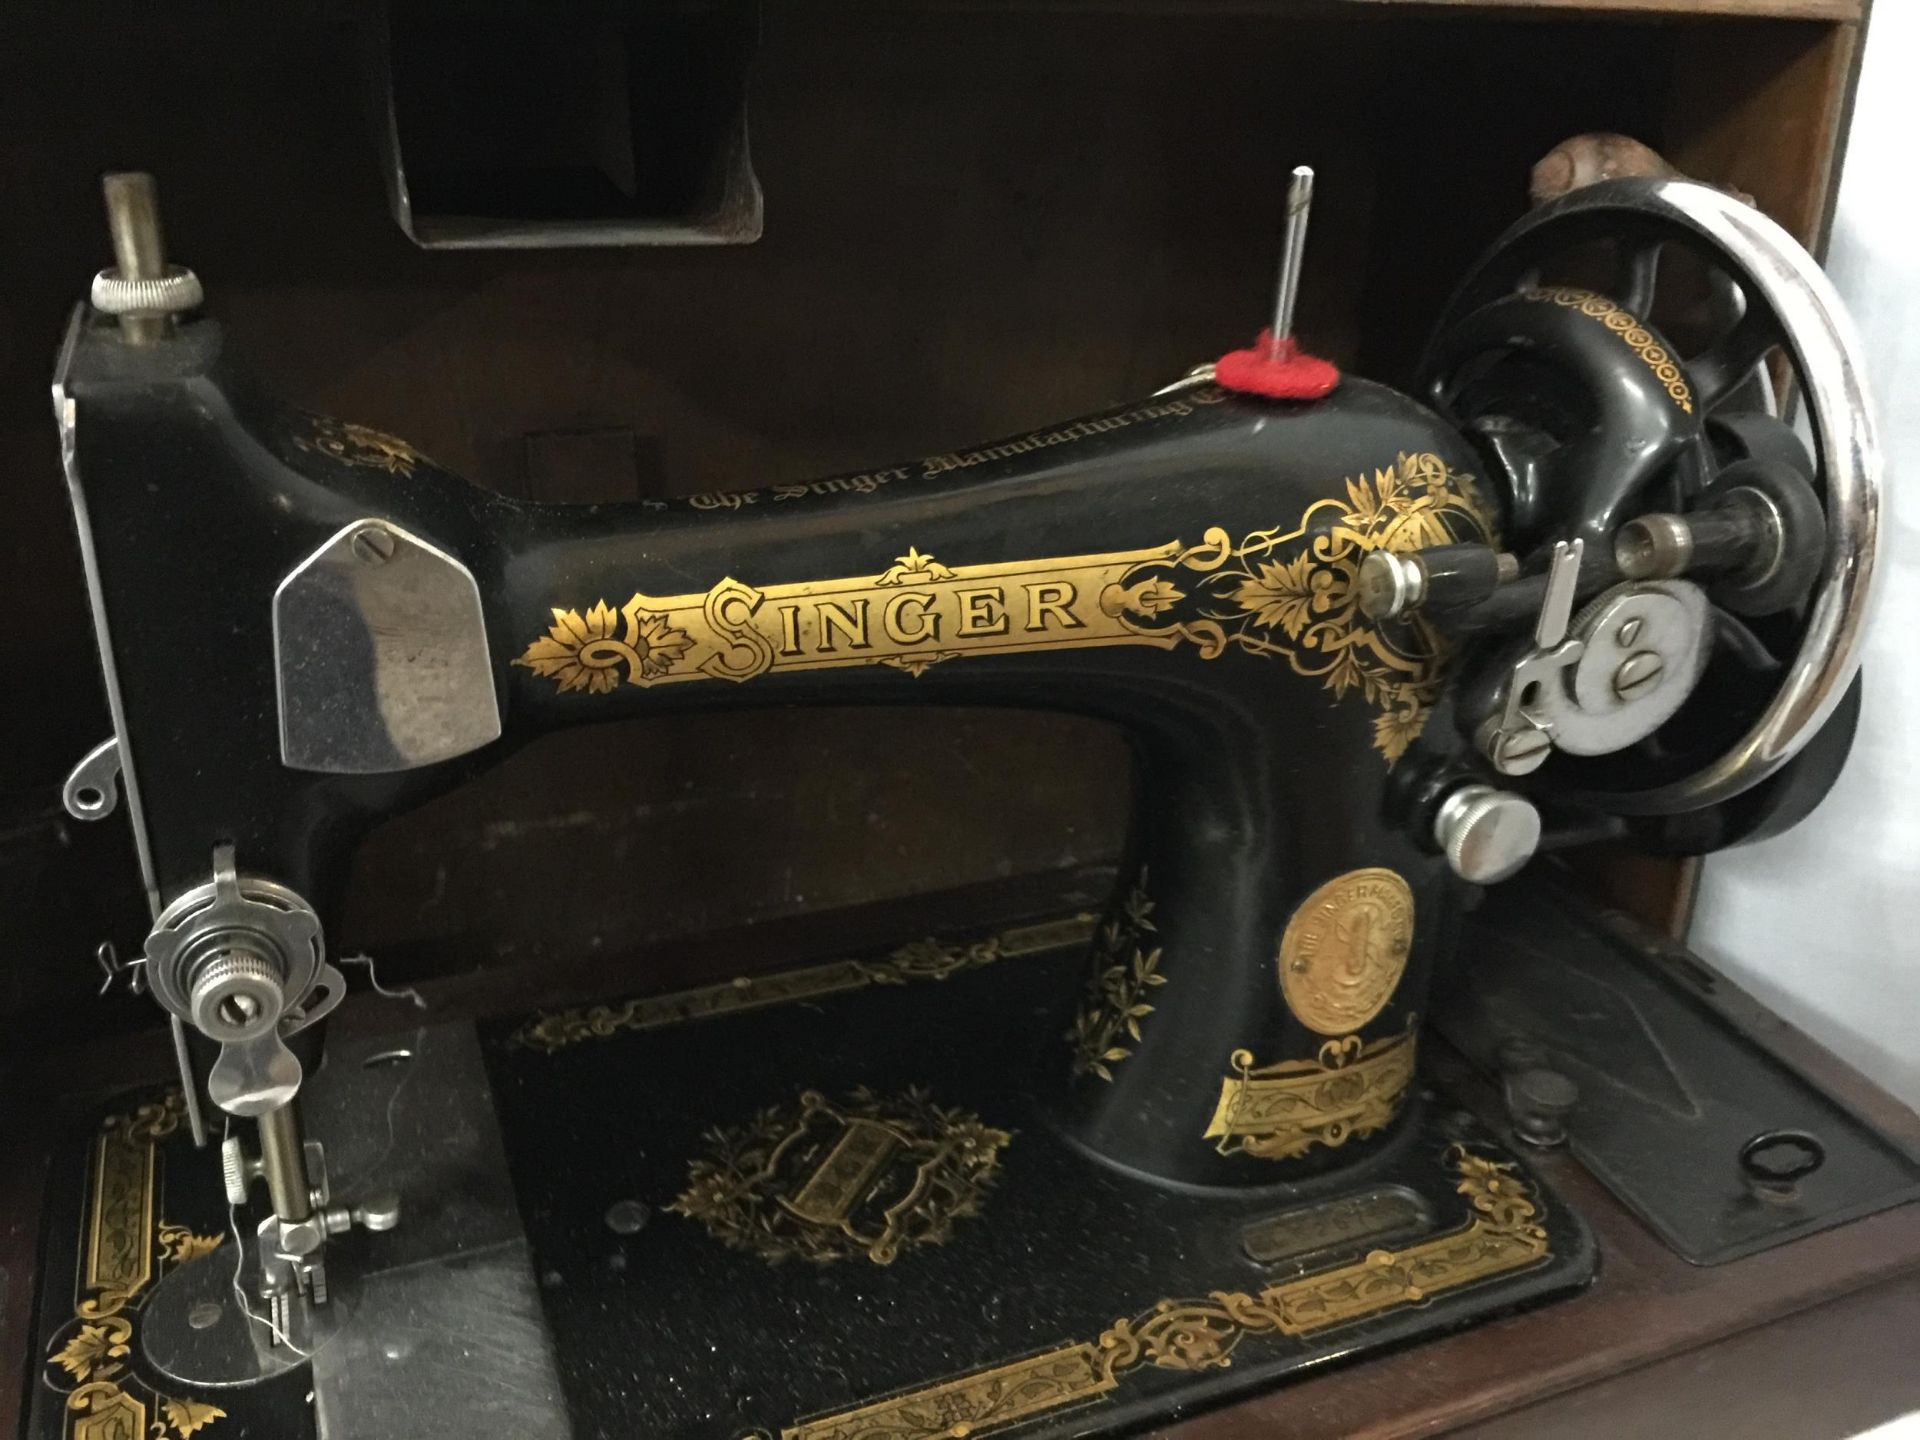 A BOXED VINTAGE SINGER SEWING MACHINE, SERIAL NUMBER EC625798 (WITH FRONT COVER) - Image 3 of 4